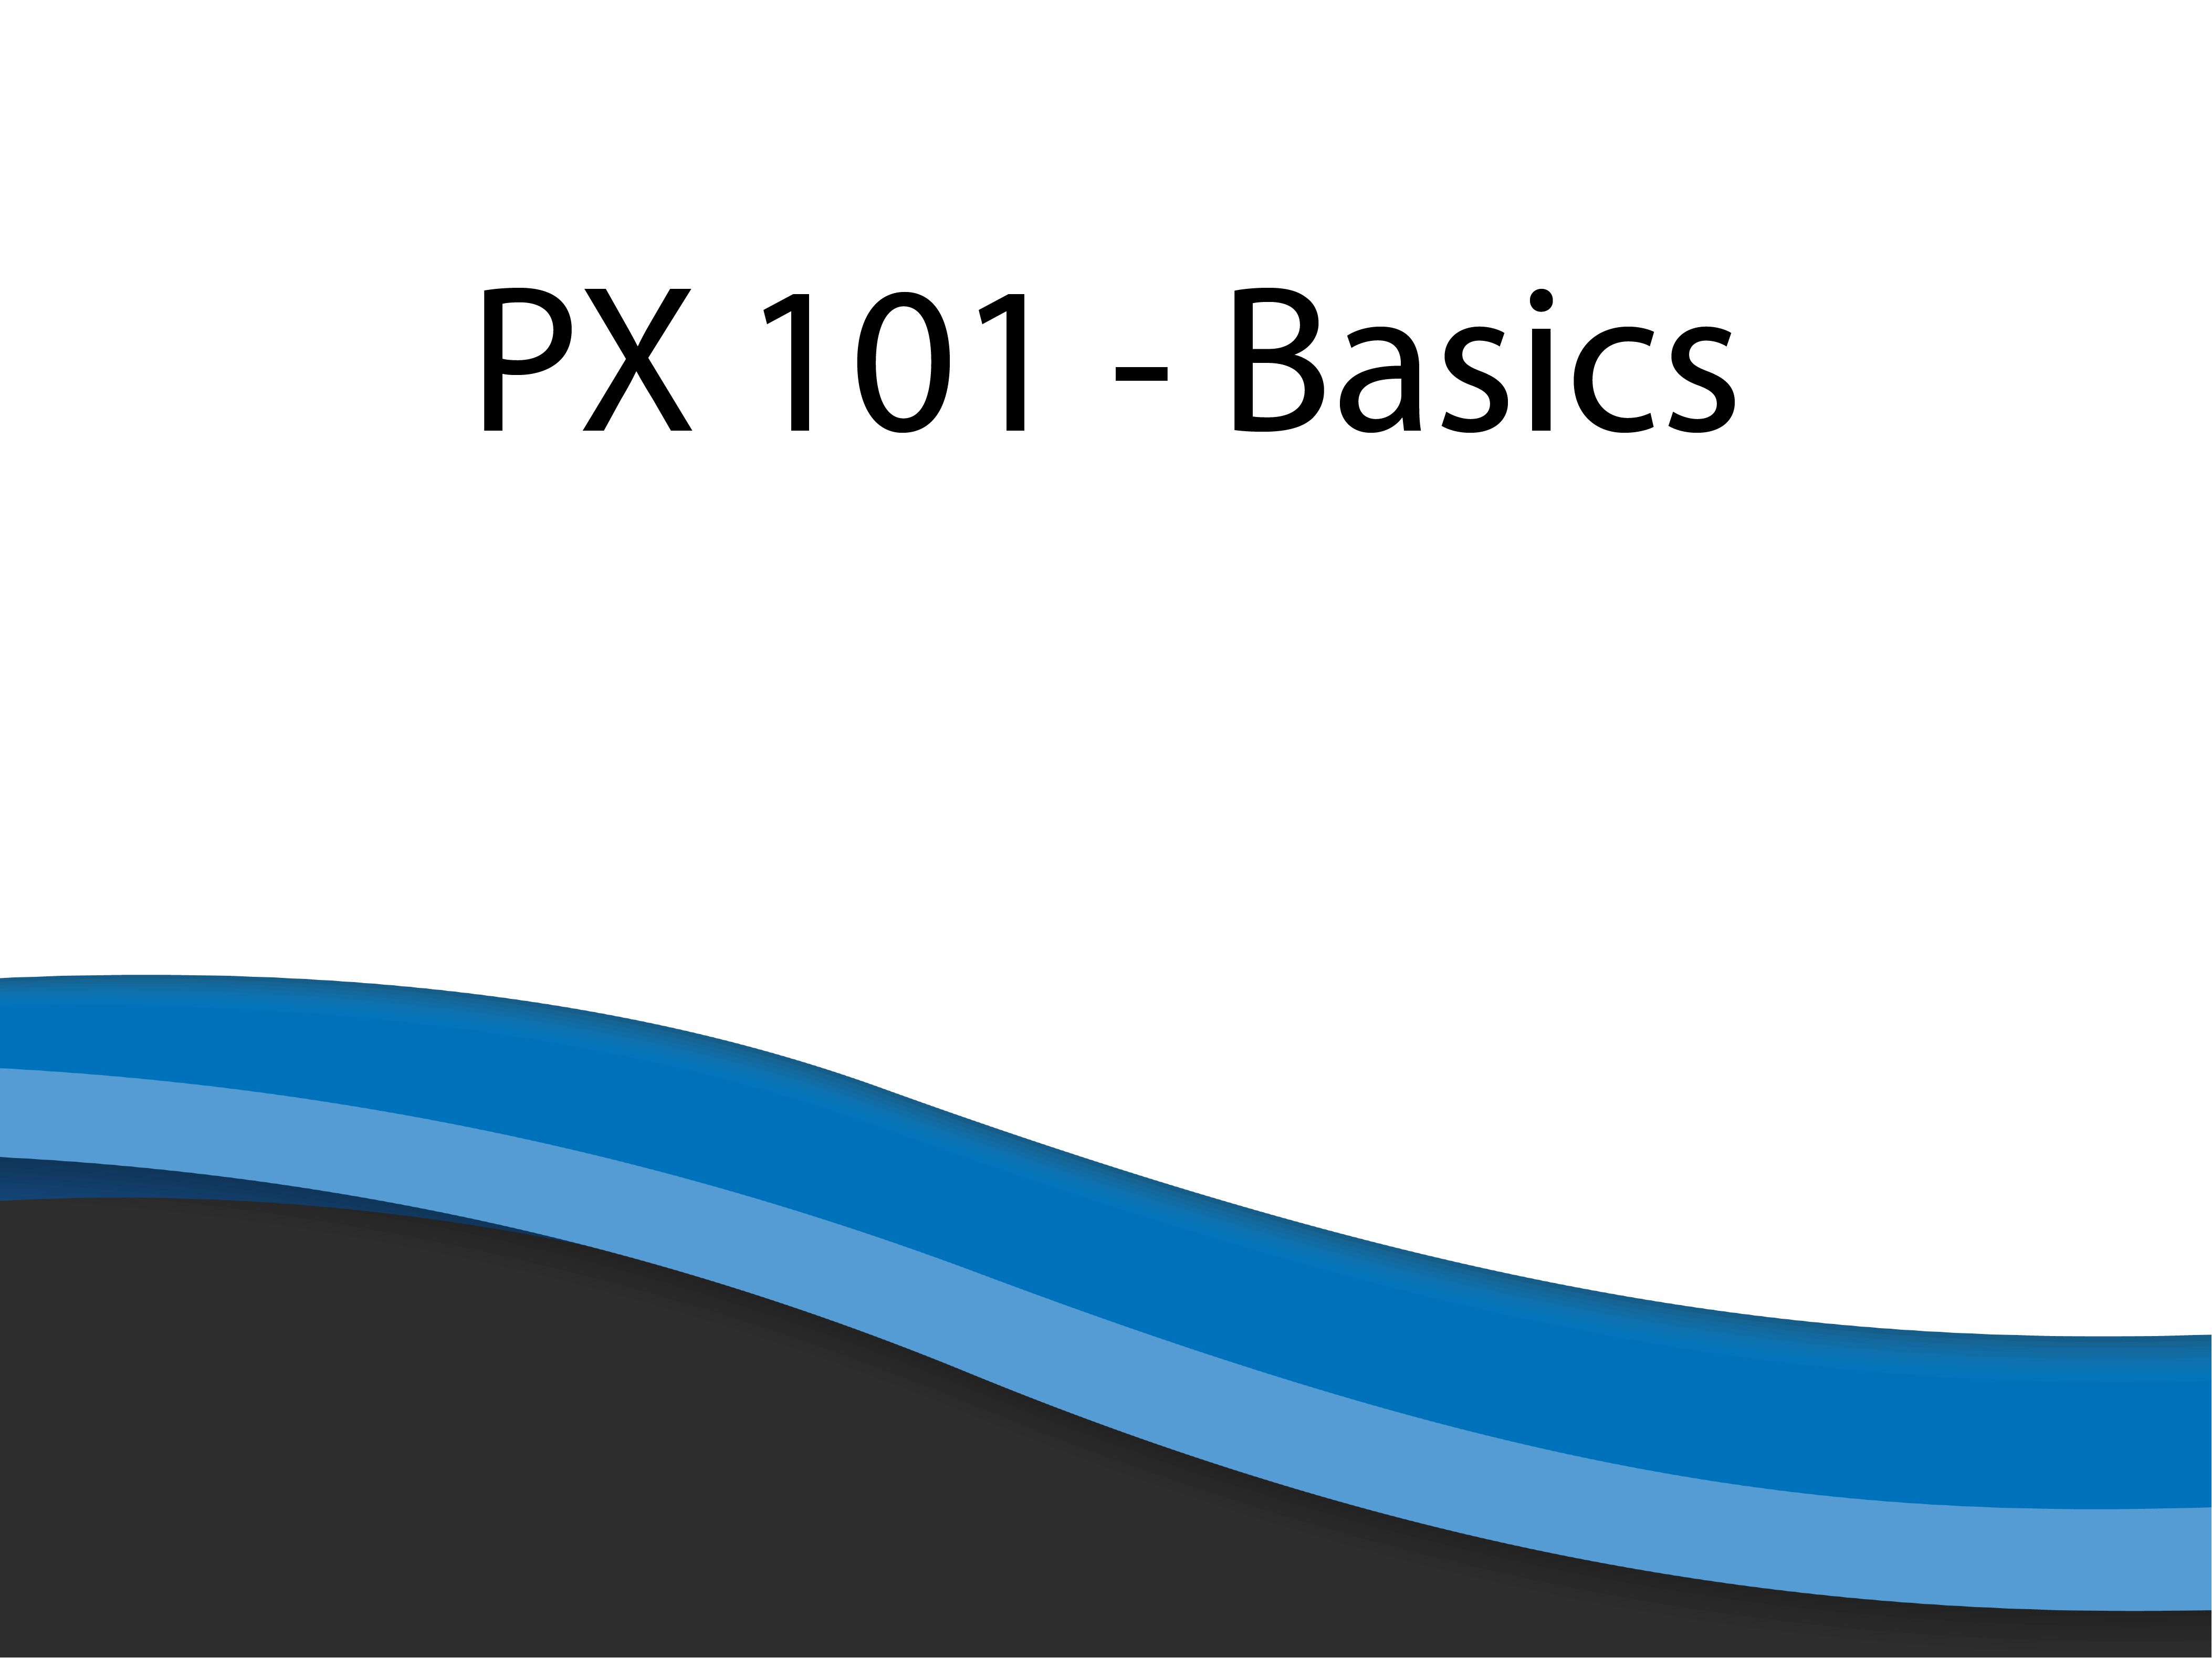 PX 101 – Power Practice Basic Features